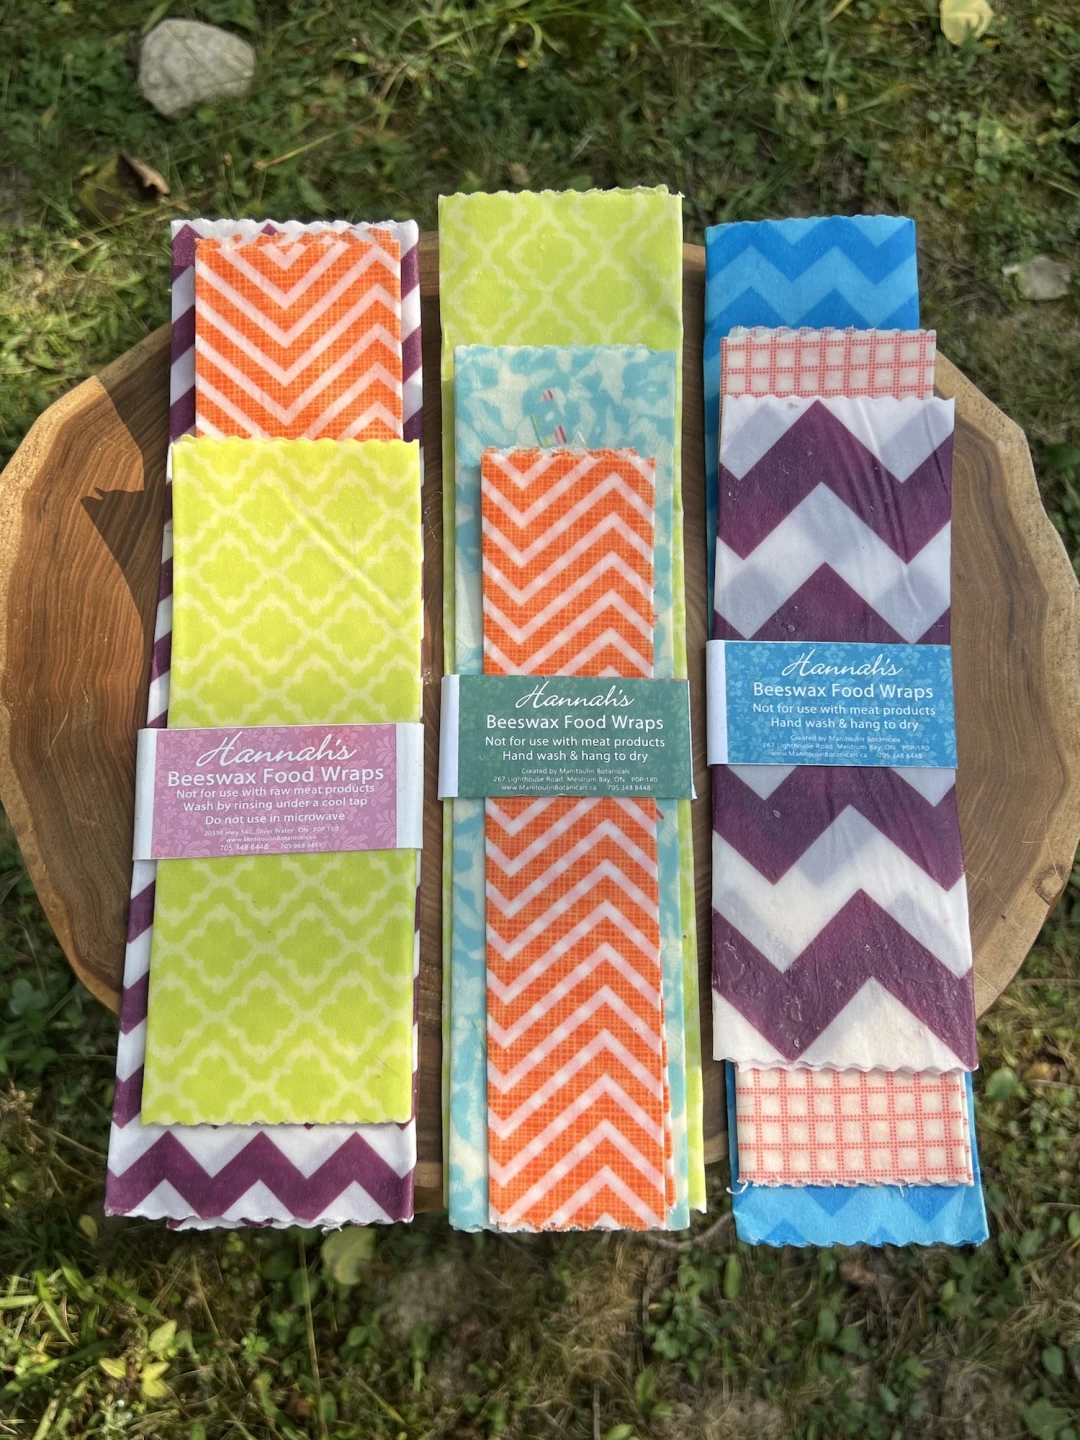 Hannah's Beeswax Food Wraps - Small  sets of 3